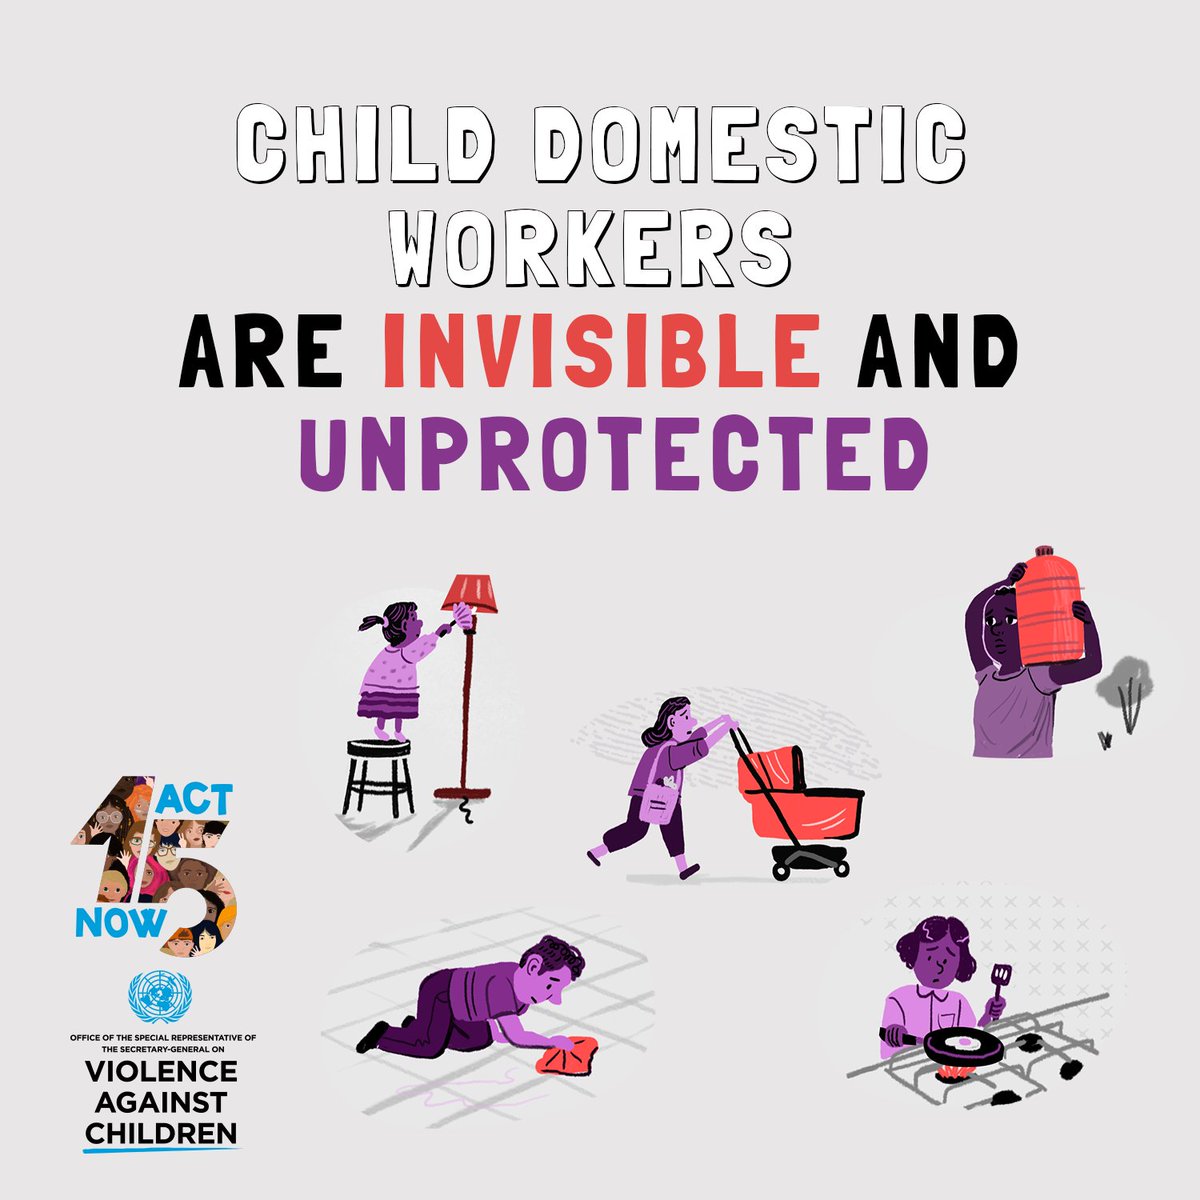 Because of how they work and live, #ChildDomestic workers are often invisible and disconnected from services, including protection. Being invisible prevents them from fulfilling their rights, “development”, wellbeing and protection. 🔗violenceagainstchildren.un.org/sites/violence… #ActNOWToEndVAC